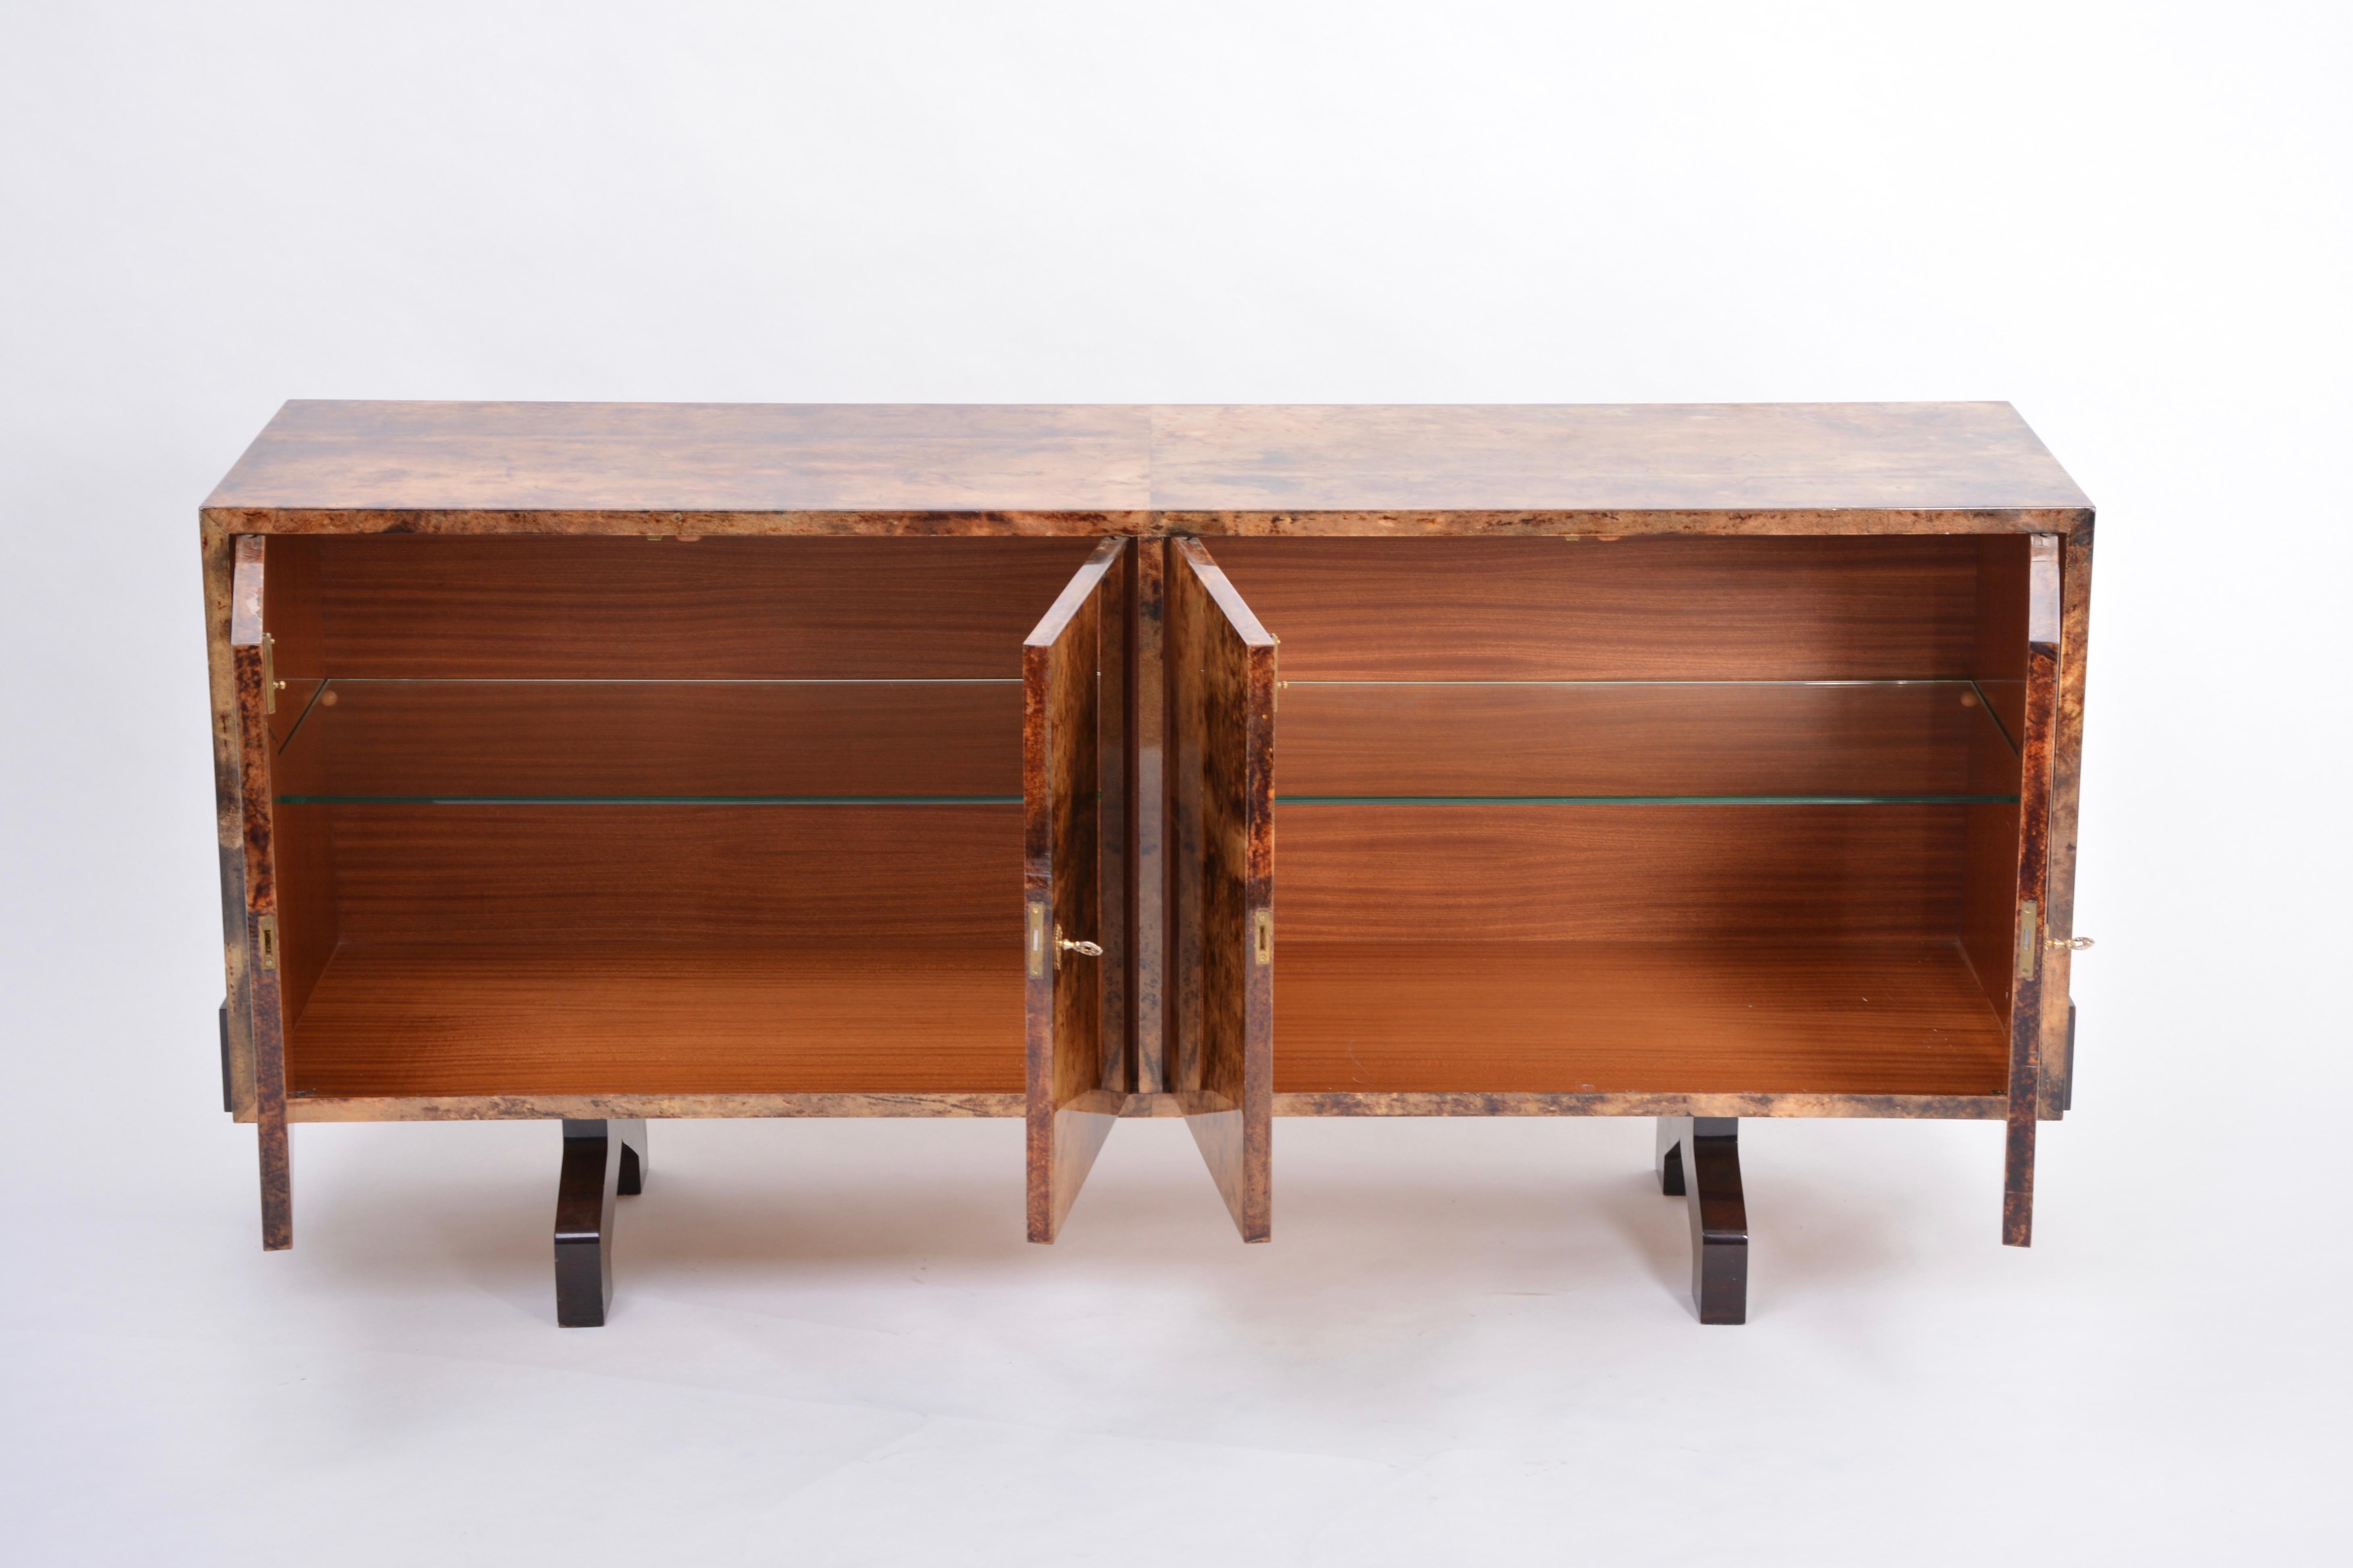 Mid-Century Sideboard in Brown Lacquered Goat Skin by Aldo Tura, Italy, 1970s
Sideboard with two hinged doors designed by Aldo Tura and produced in Italy in the 1970s.
Wood covered with goatskin in gorgeous tones of brown and yellow.
Each